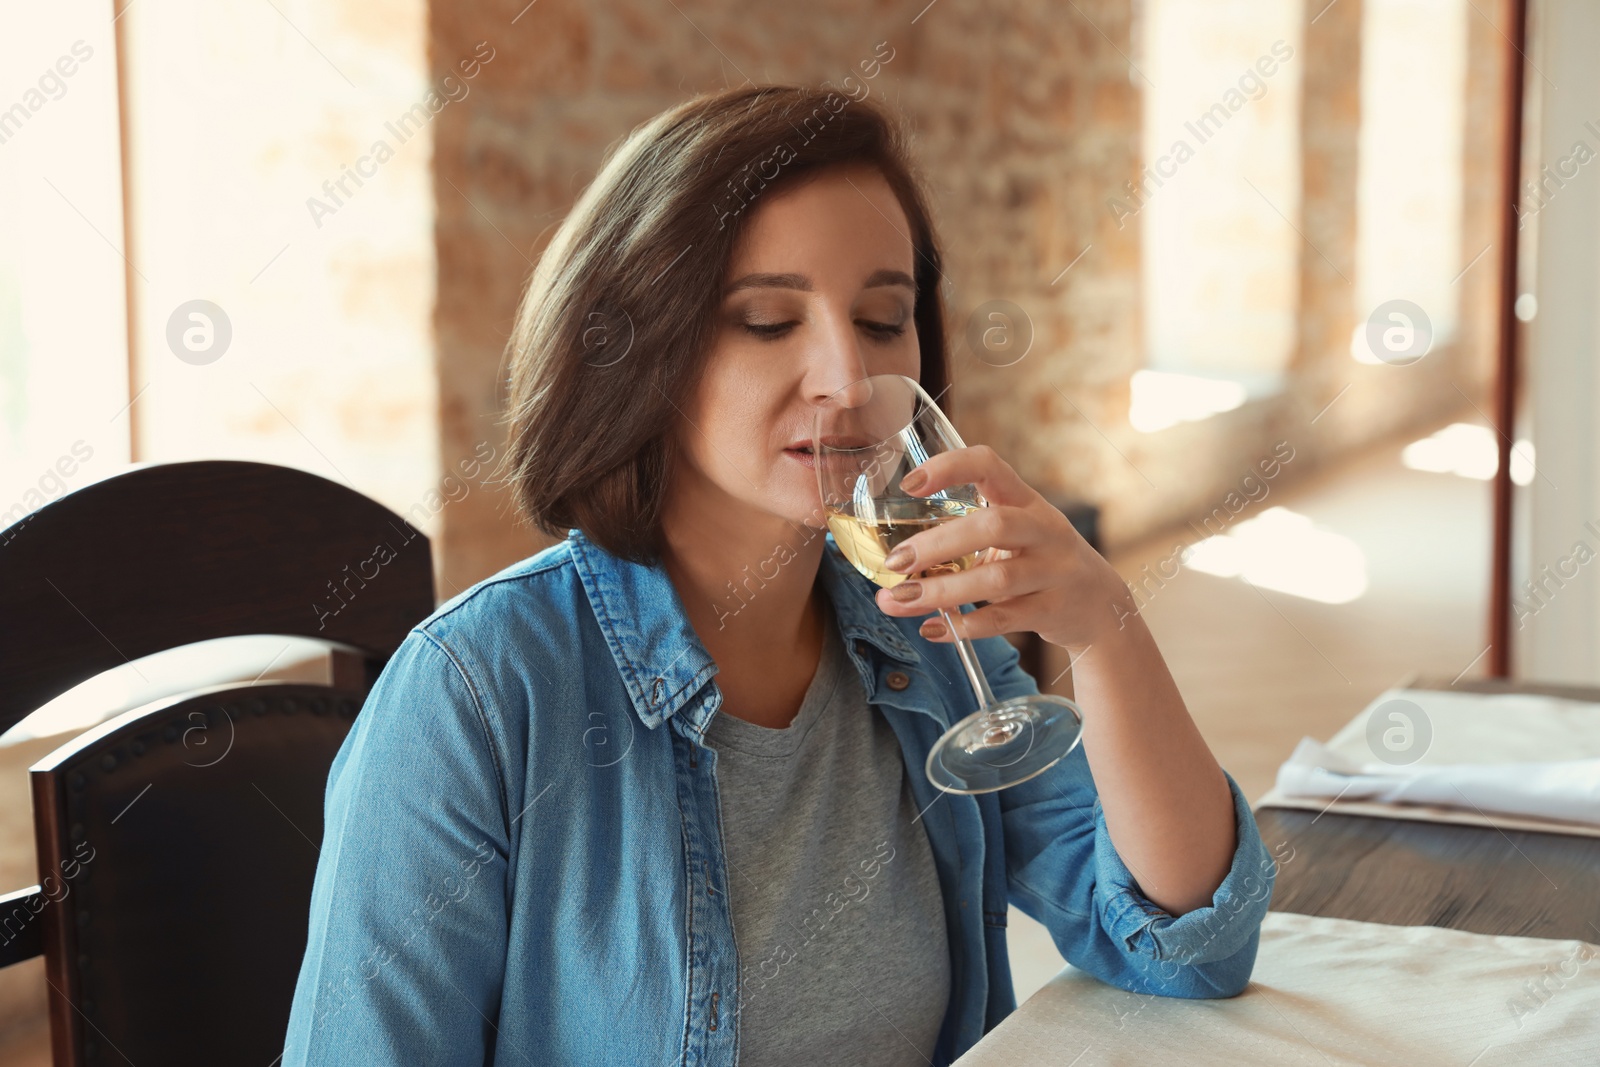 Photo of Woman with glass of white wine at table indoors